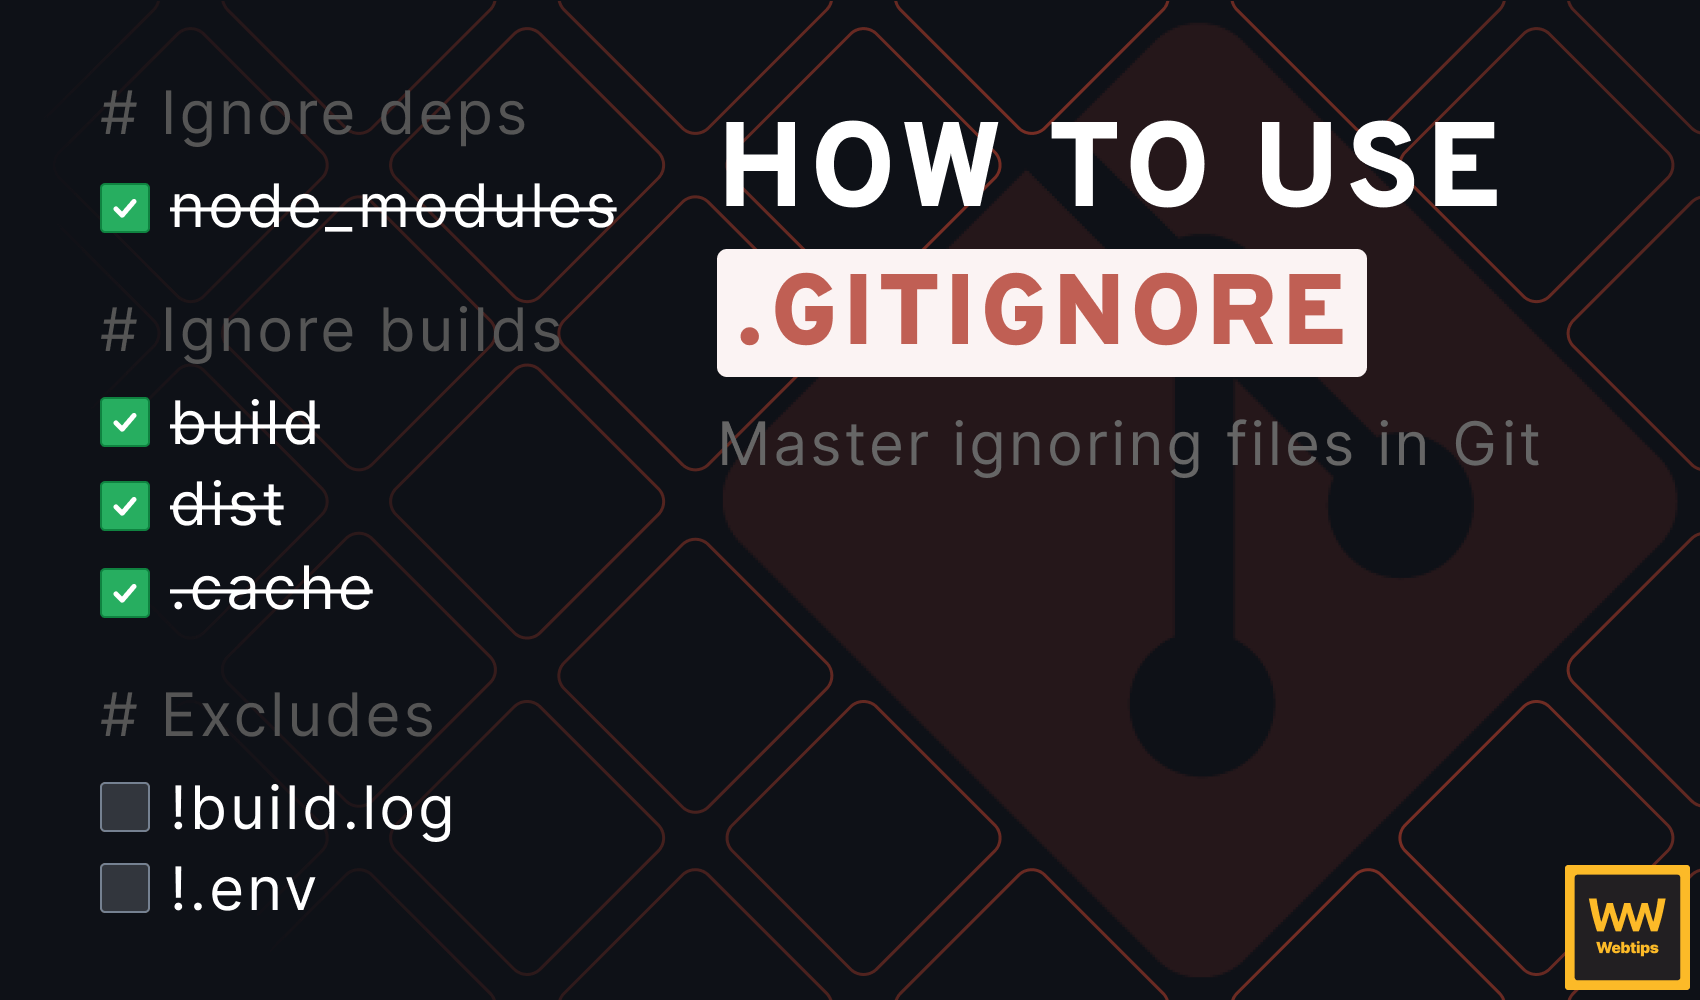 How to Use Gitignore to Its Full Potential